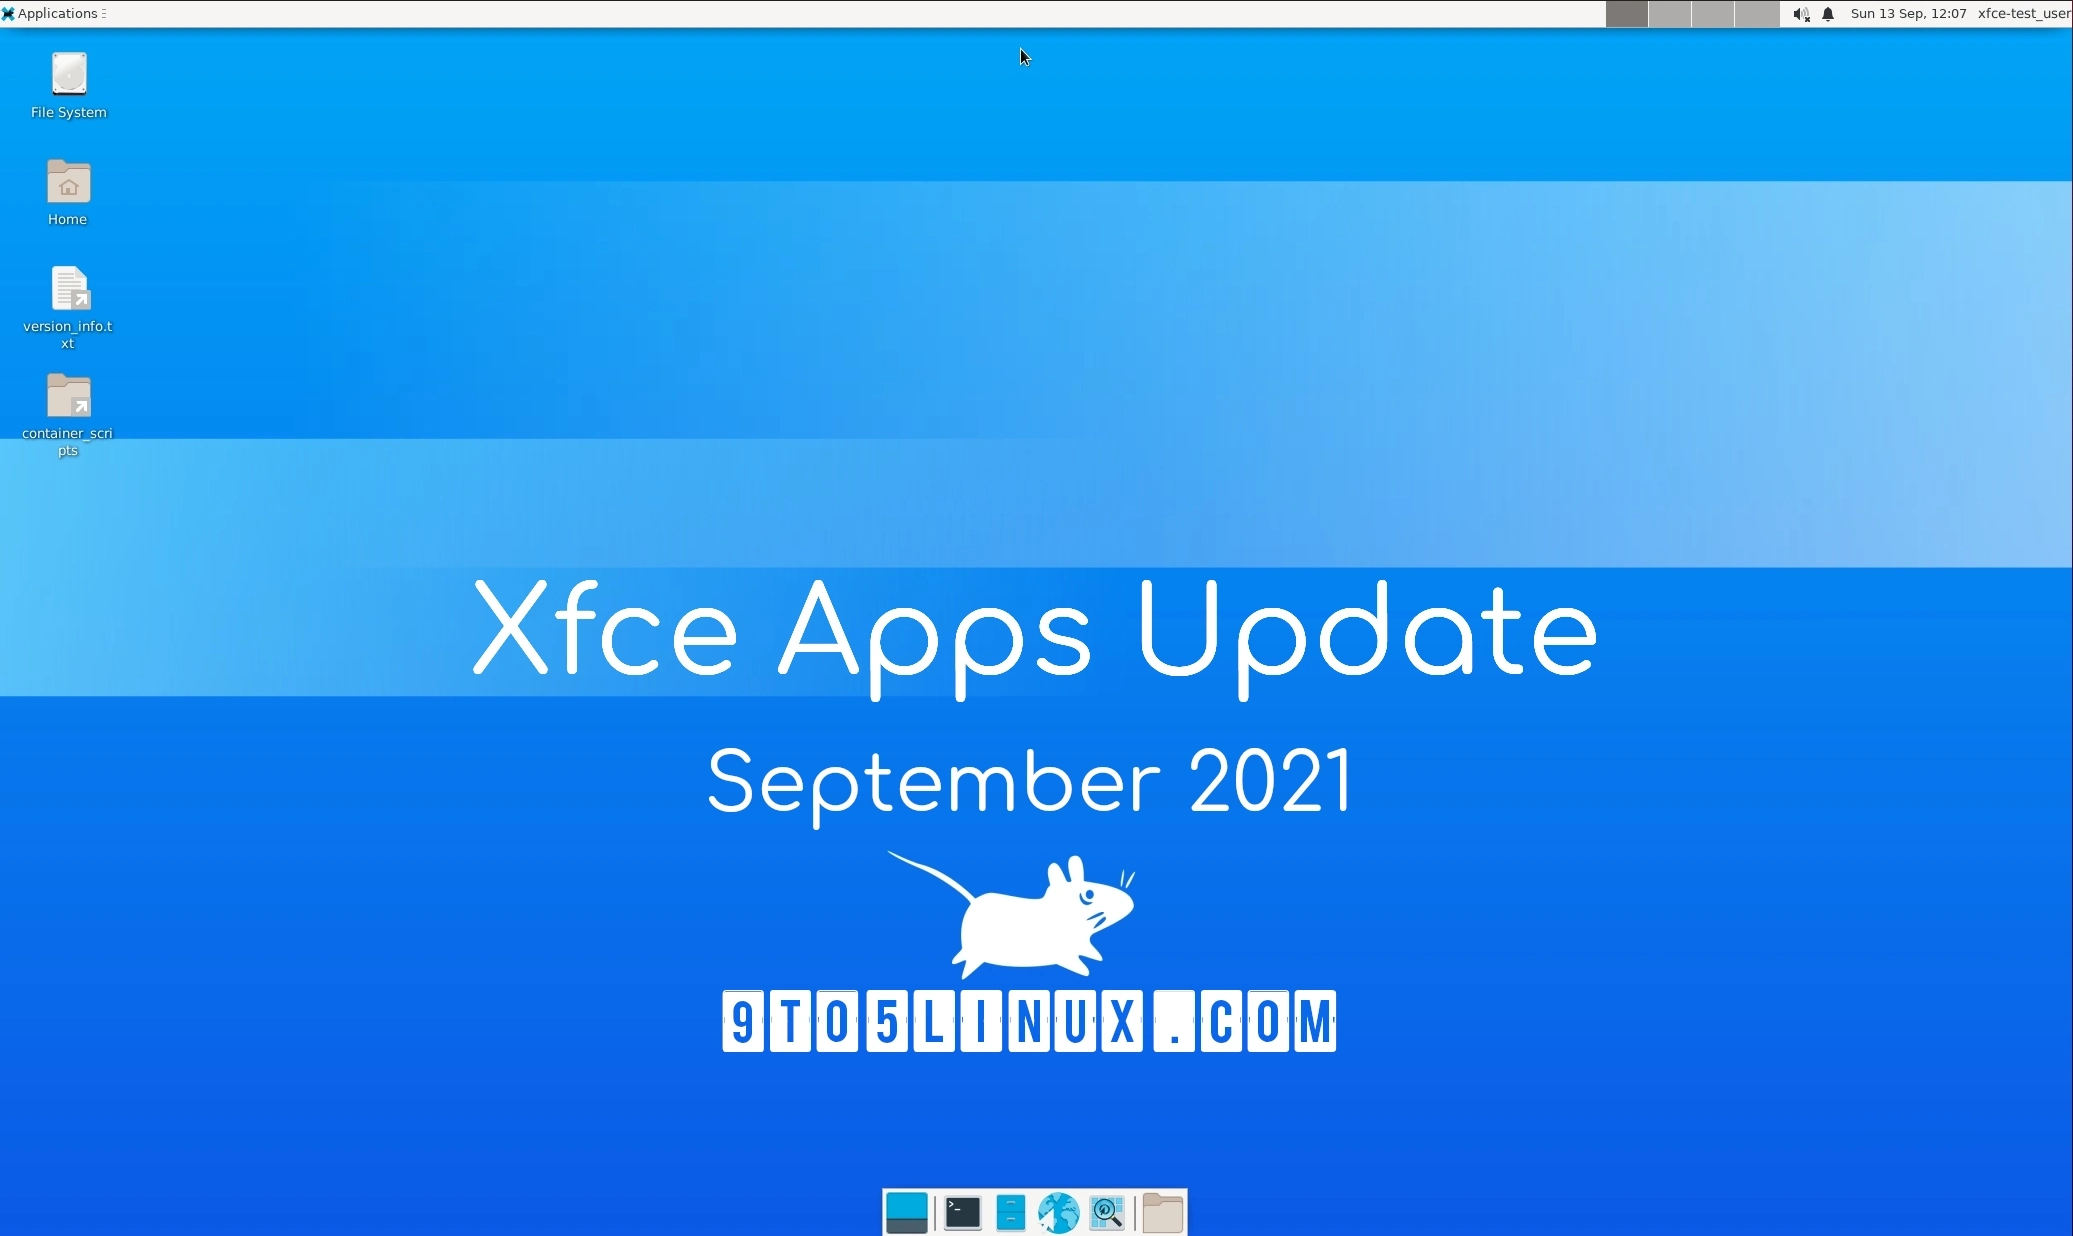 Xfce’s Apps Update for September 2021: New Releases of Thunar, Mousepad, Whisker Menu